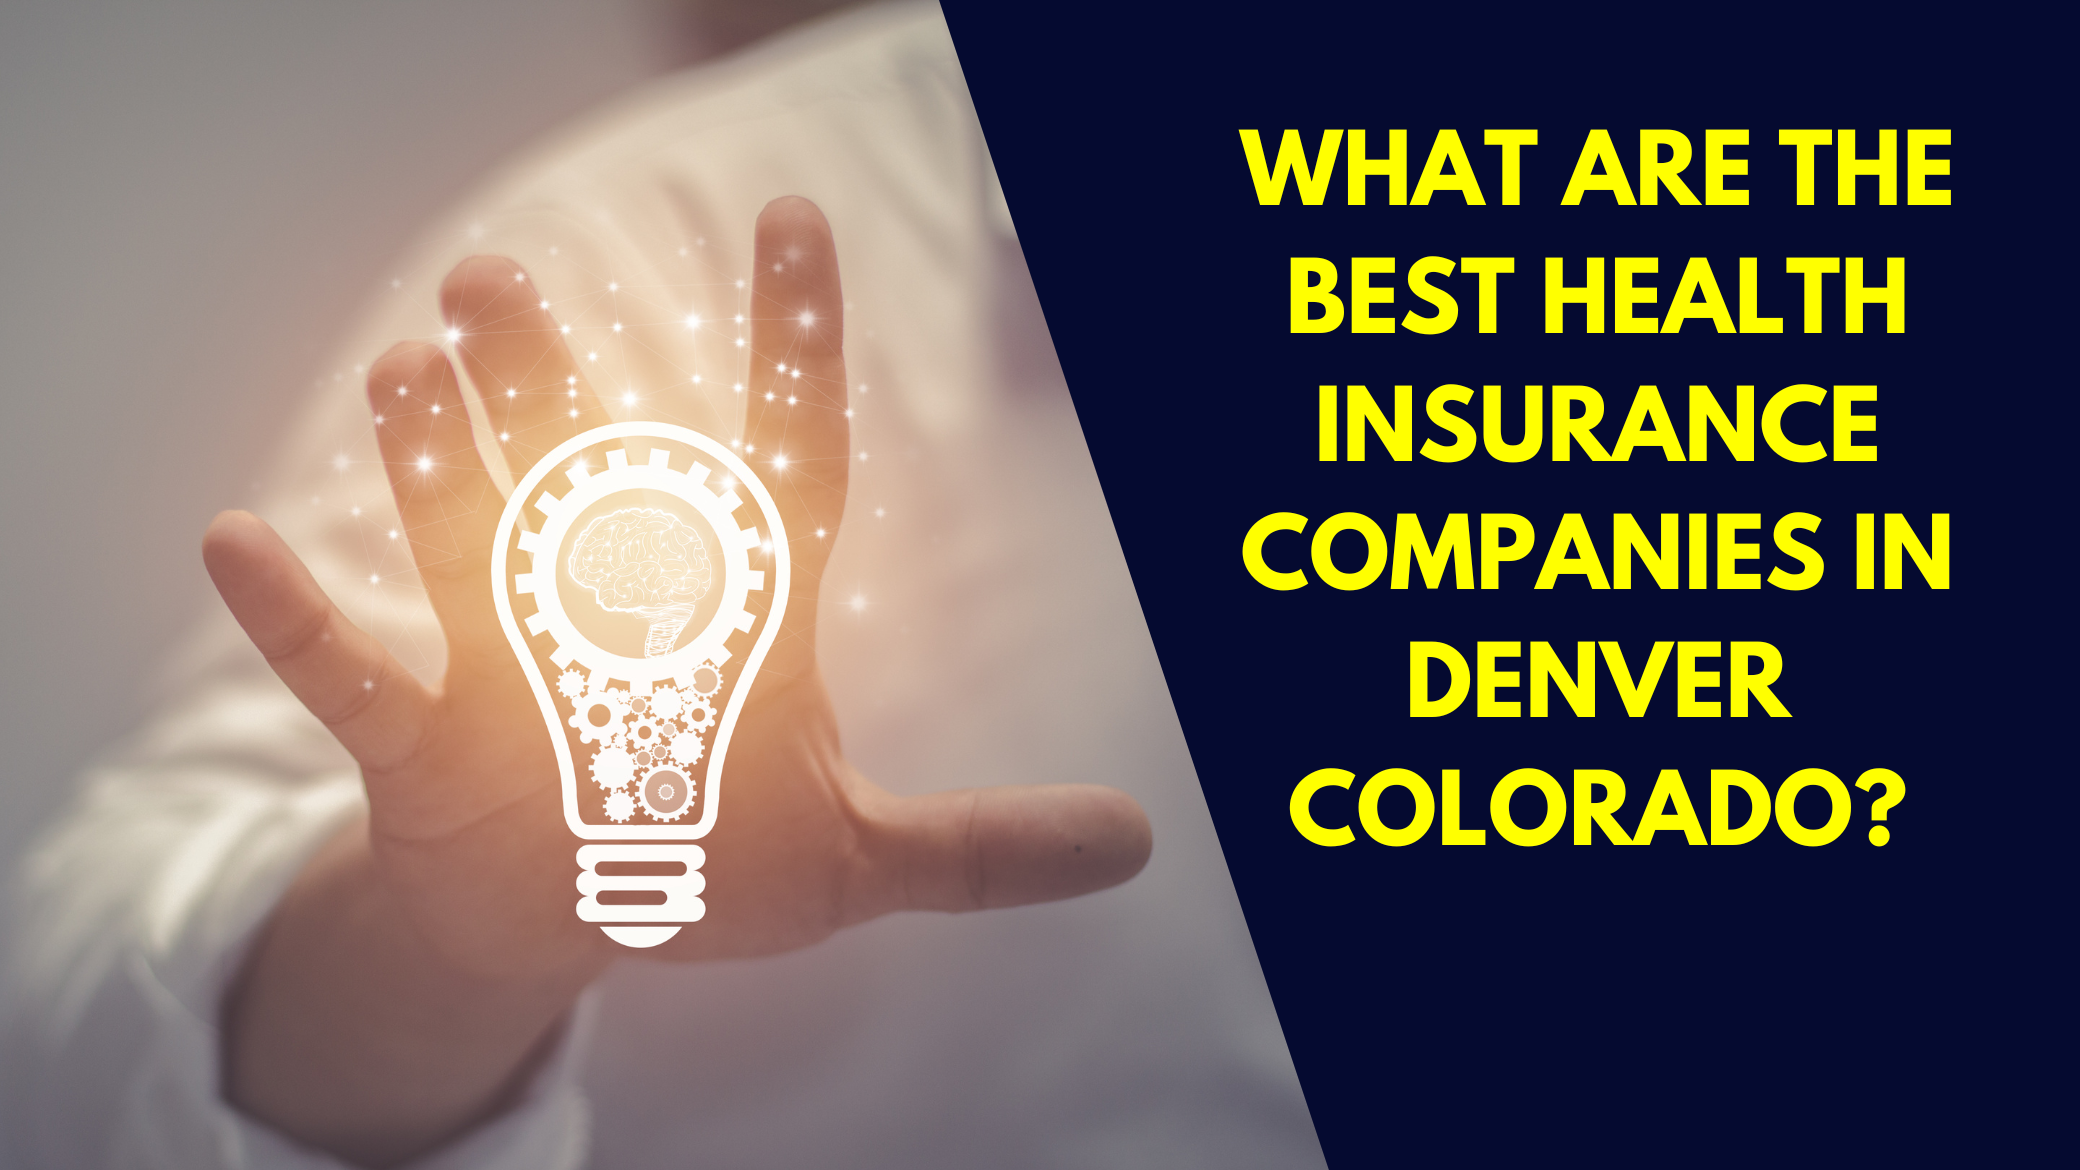 What Are The Best Health Insurance Companies In Denver Colorado